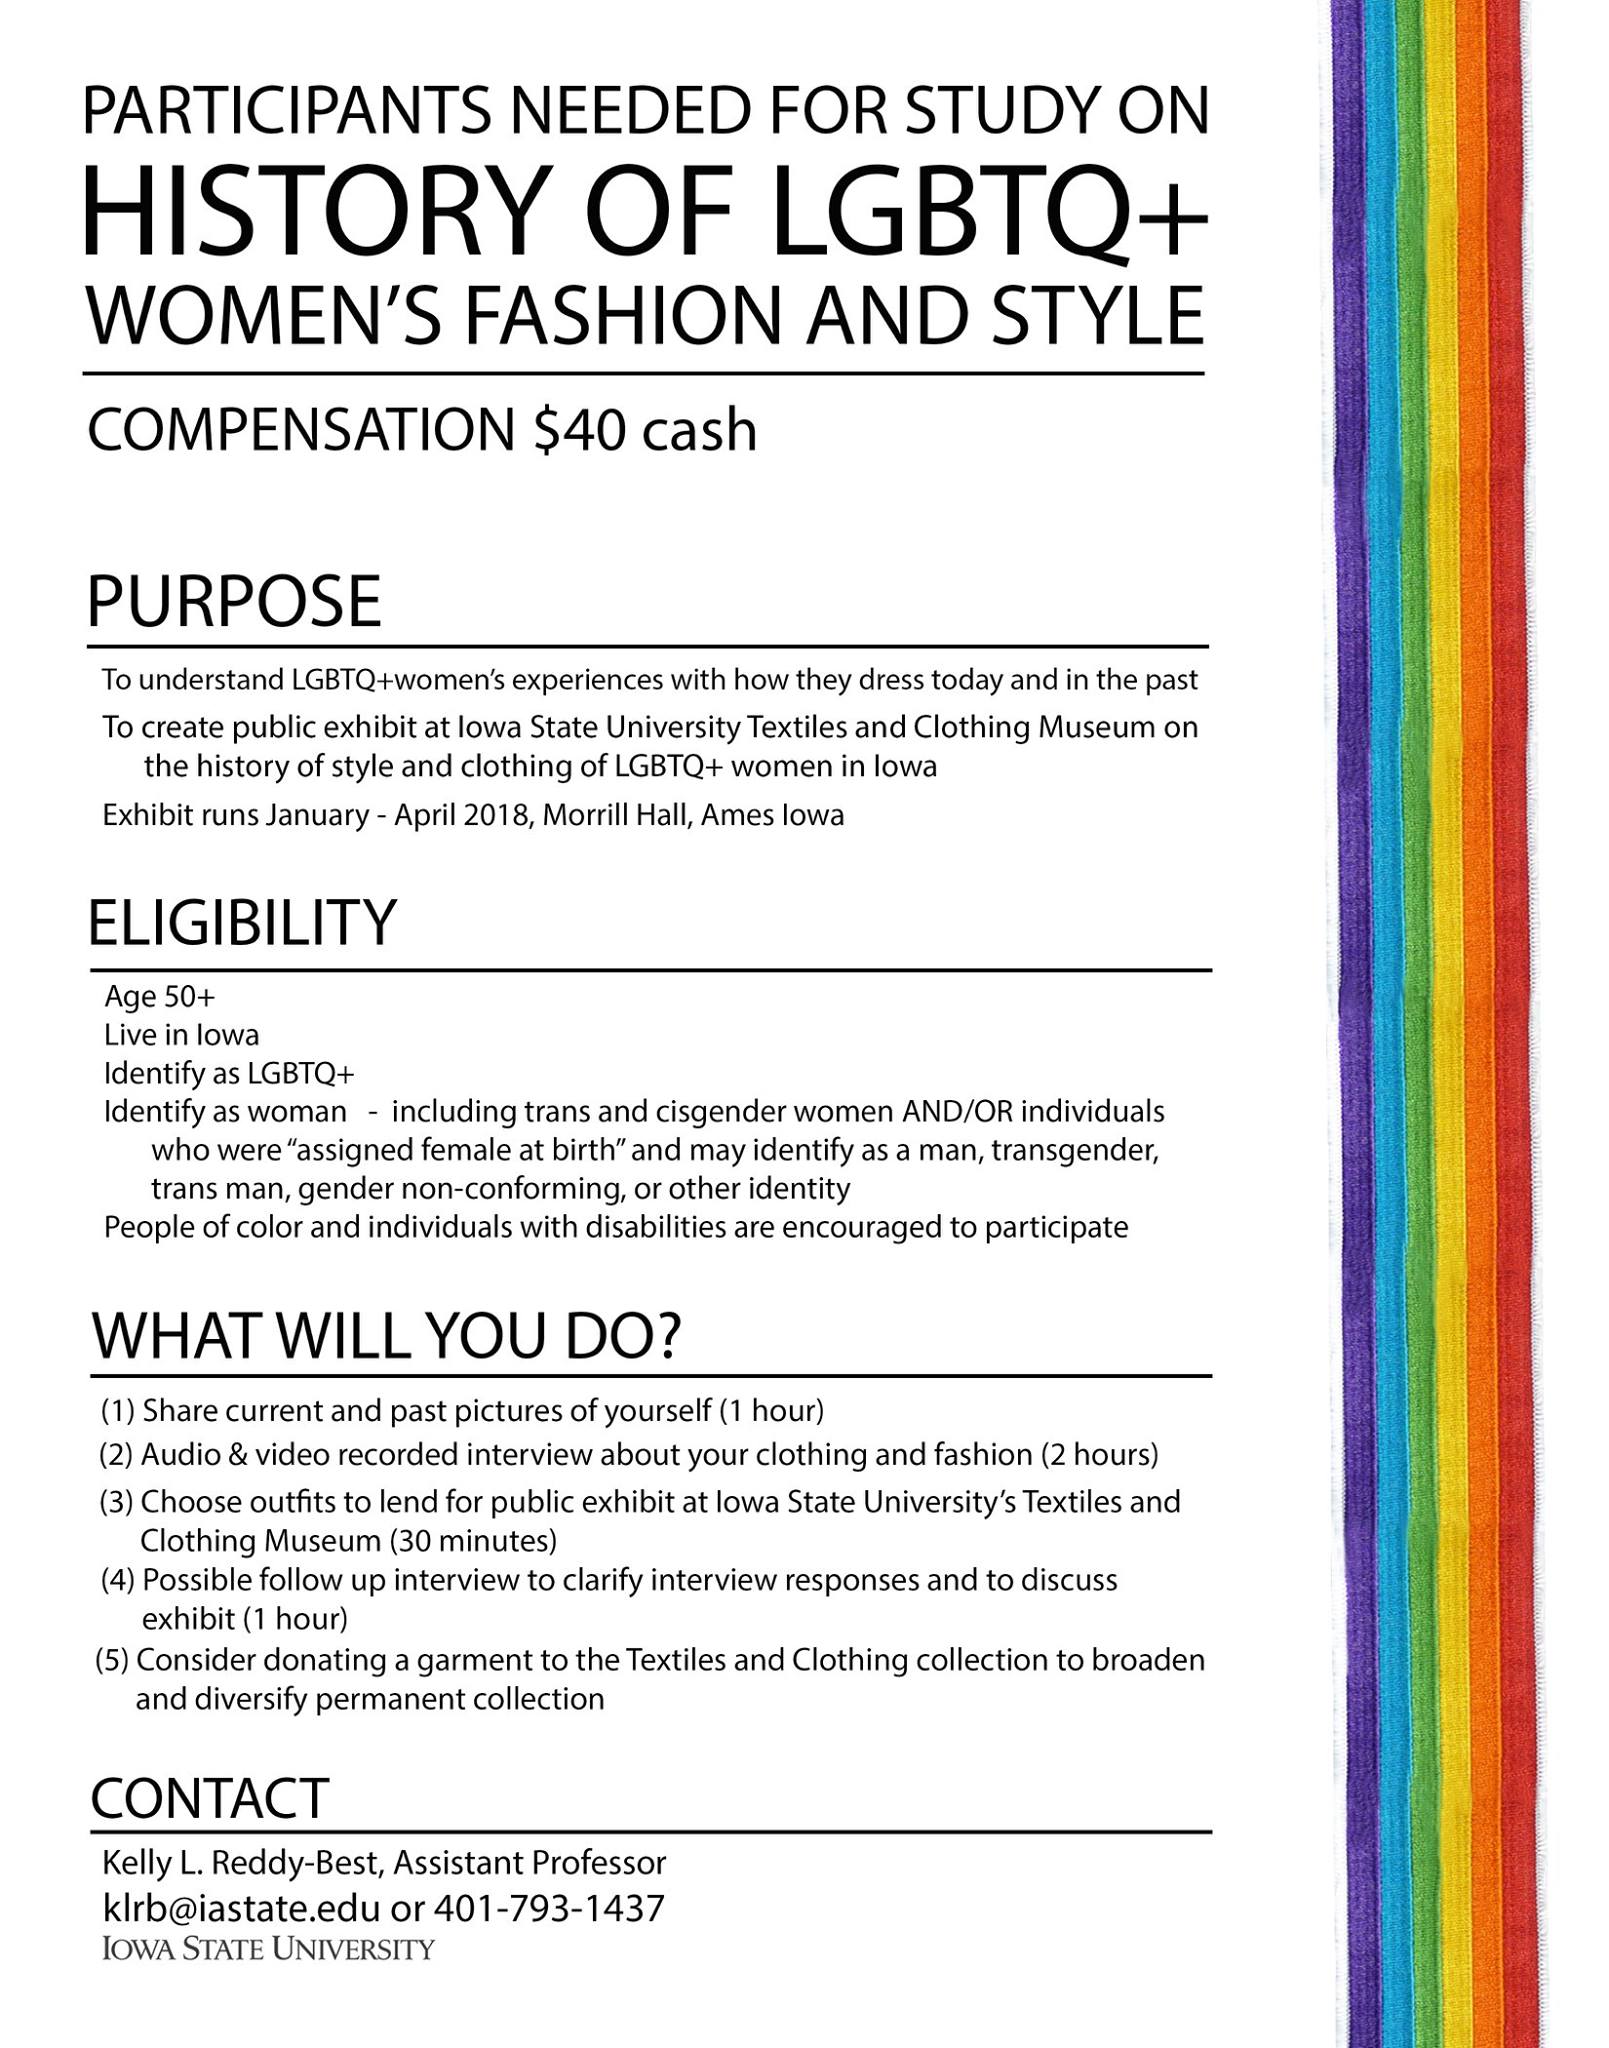 Flyer for participant recruitment "for study on history of LGBTQ+ women's fashion and style"